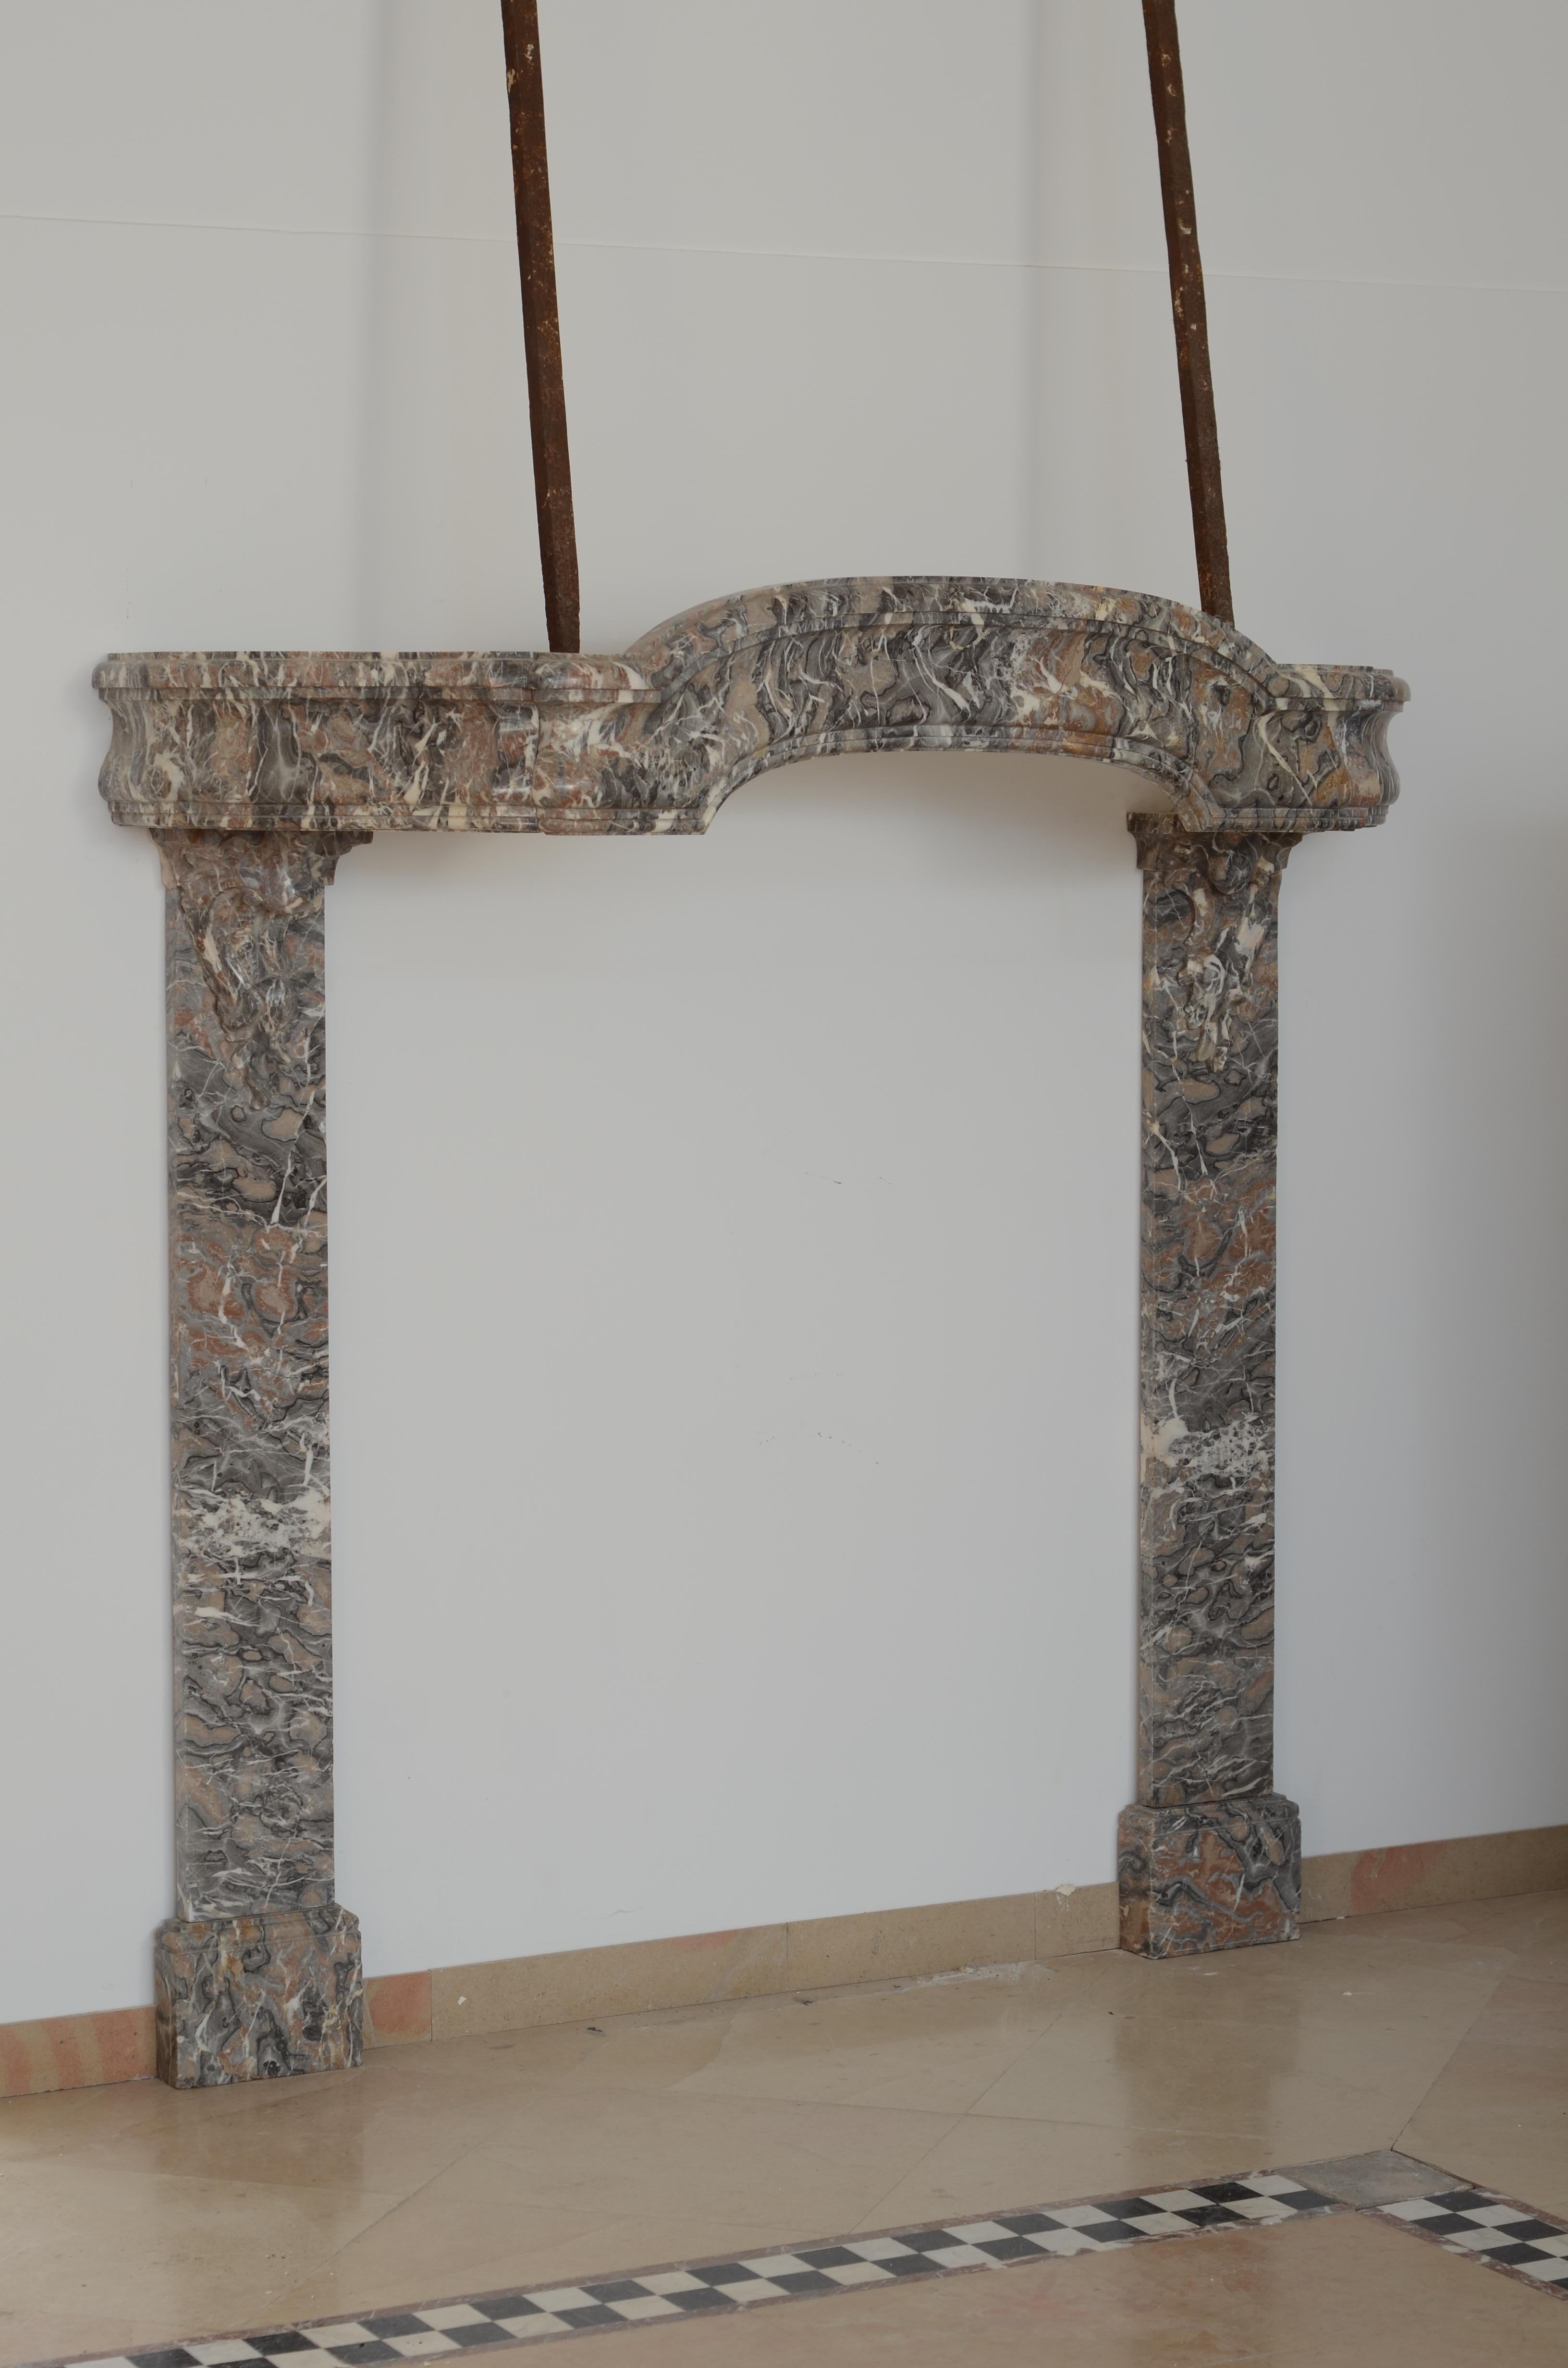 Extraordinary Dutch Louis XIV Smuiger, executed in Gris d'Ardenne marble.
This chimneypiece was made circa 1700 for a small farmers residence in Haarlem.

Simple but beautiful curved and profiles frieze, supported by amazing C-scrolls on matching